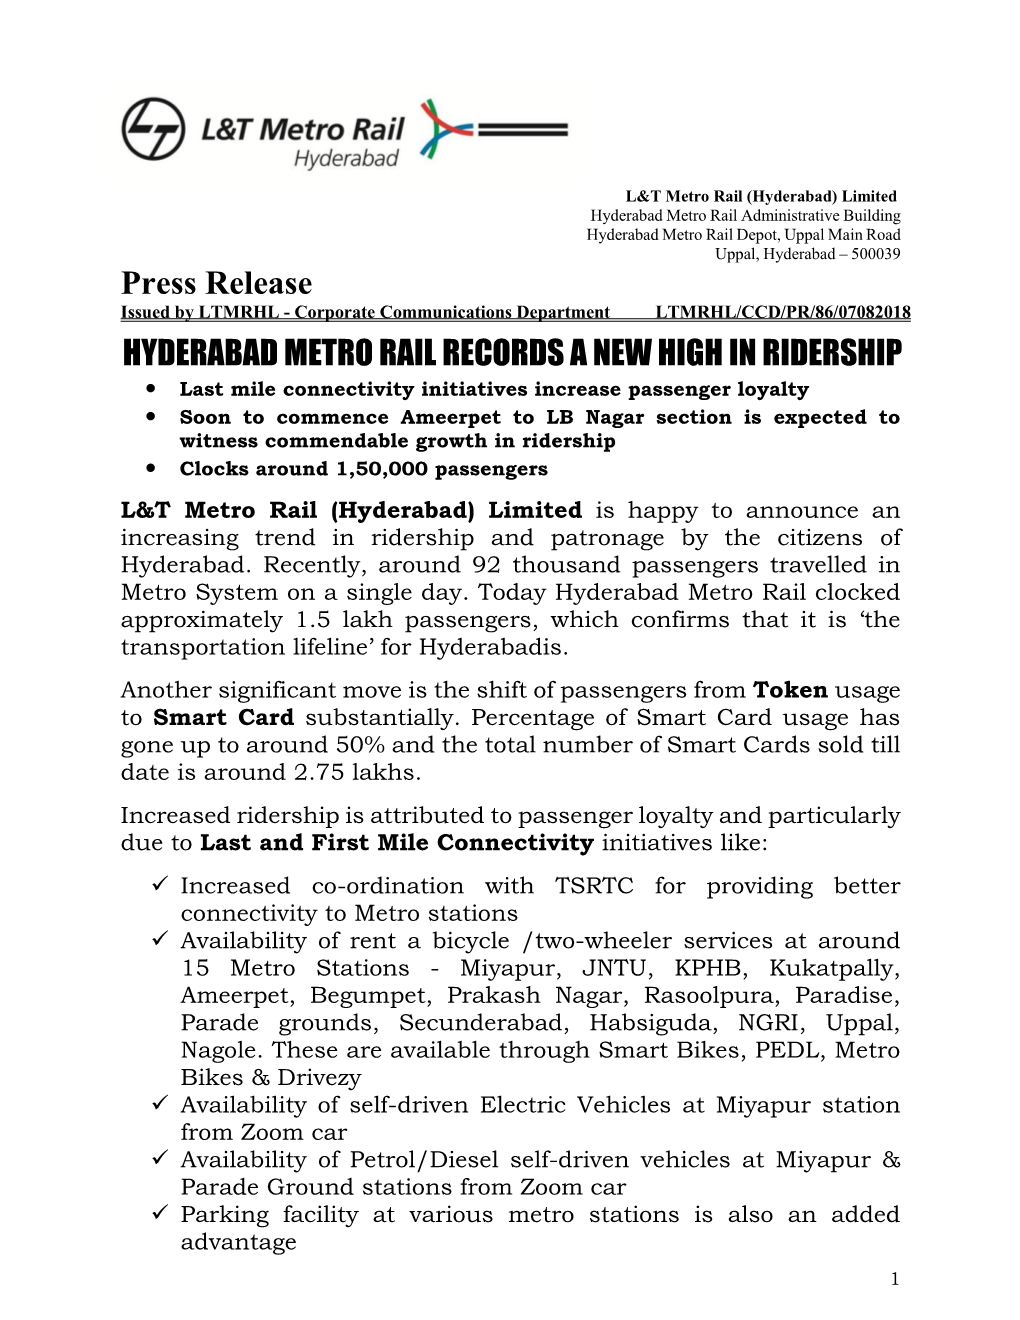 2018-08-07 Hyderabad Metro Rail Records a New High in Ridership